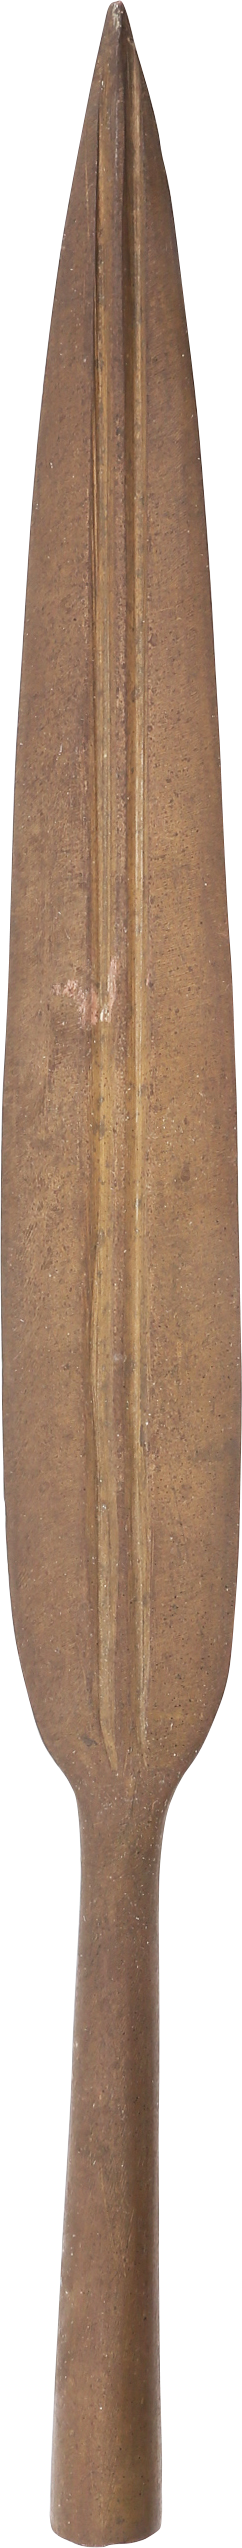 FINE KUBA SPEAR FOR THE ROYAL COURT OR KING'S CIRCLE - Fagan Arms